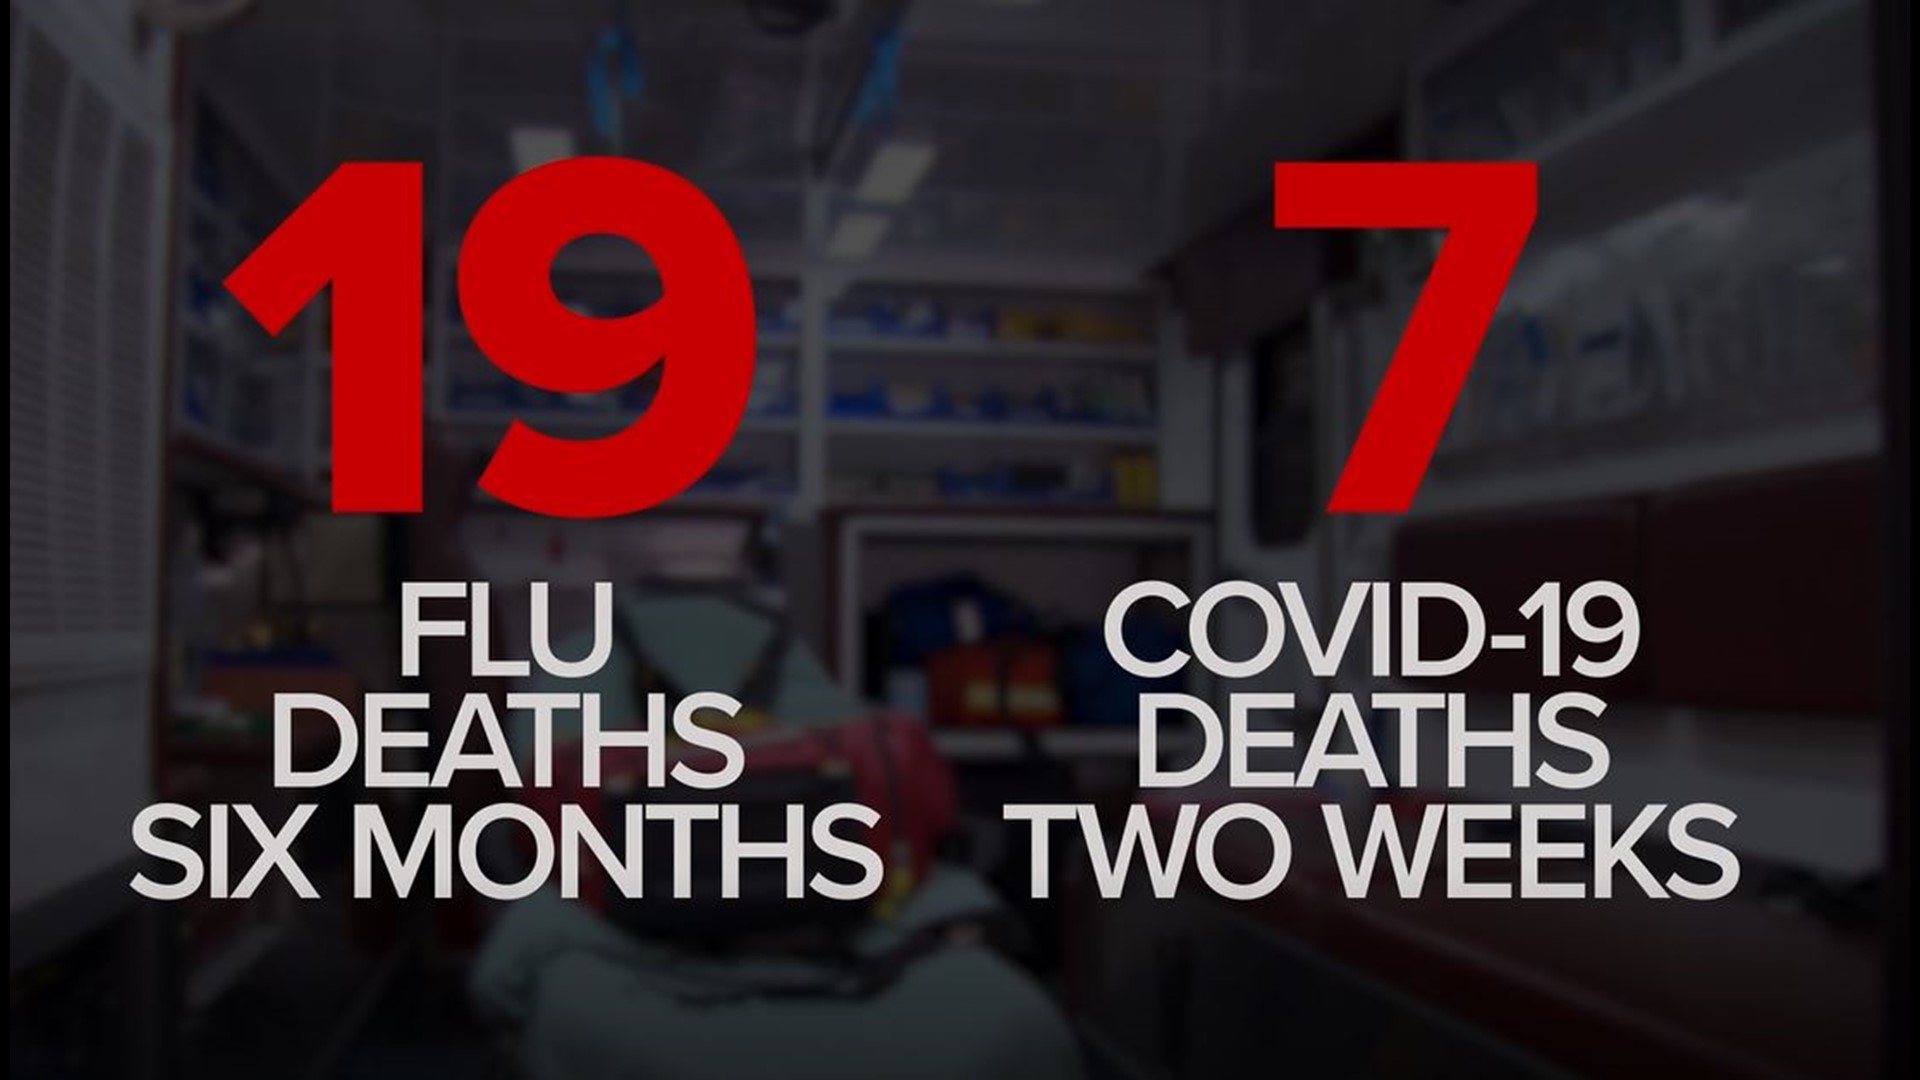 Dallas County confirmed seven deaths related to COVID-19 in two weeks. The county reported 19 flu deaths in six months.